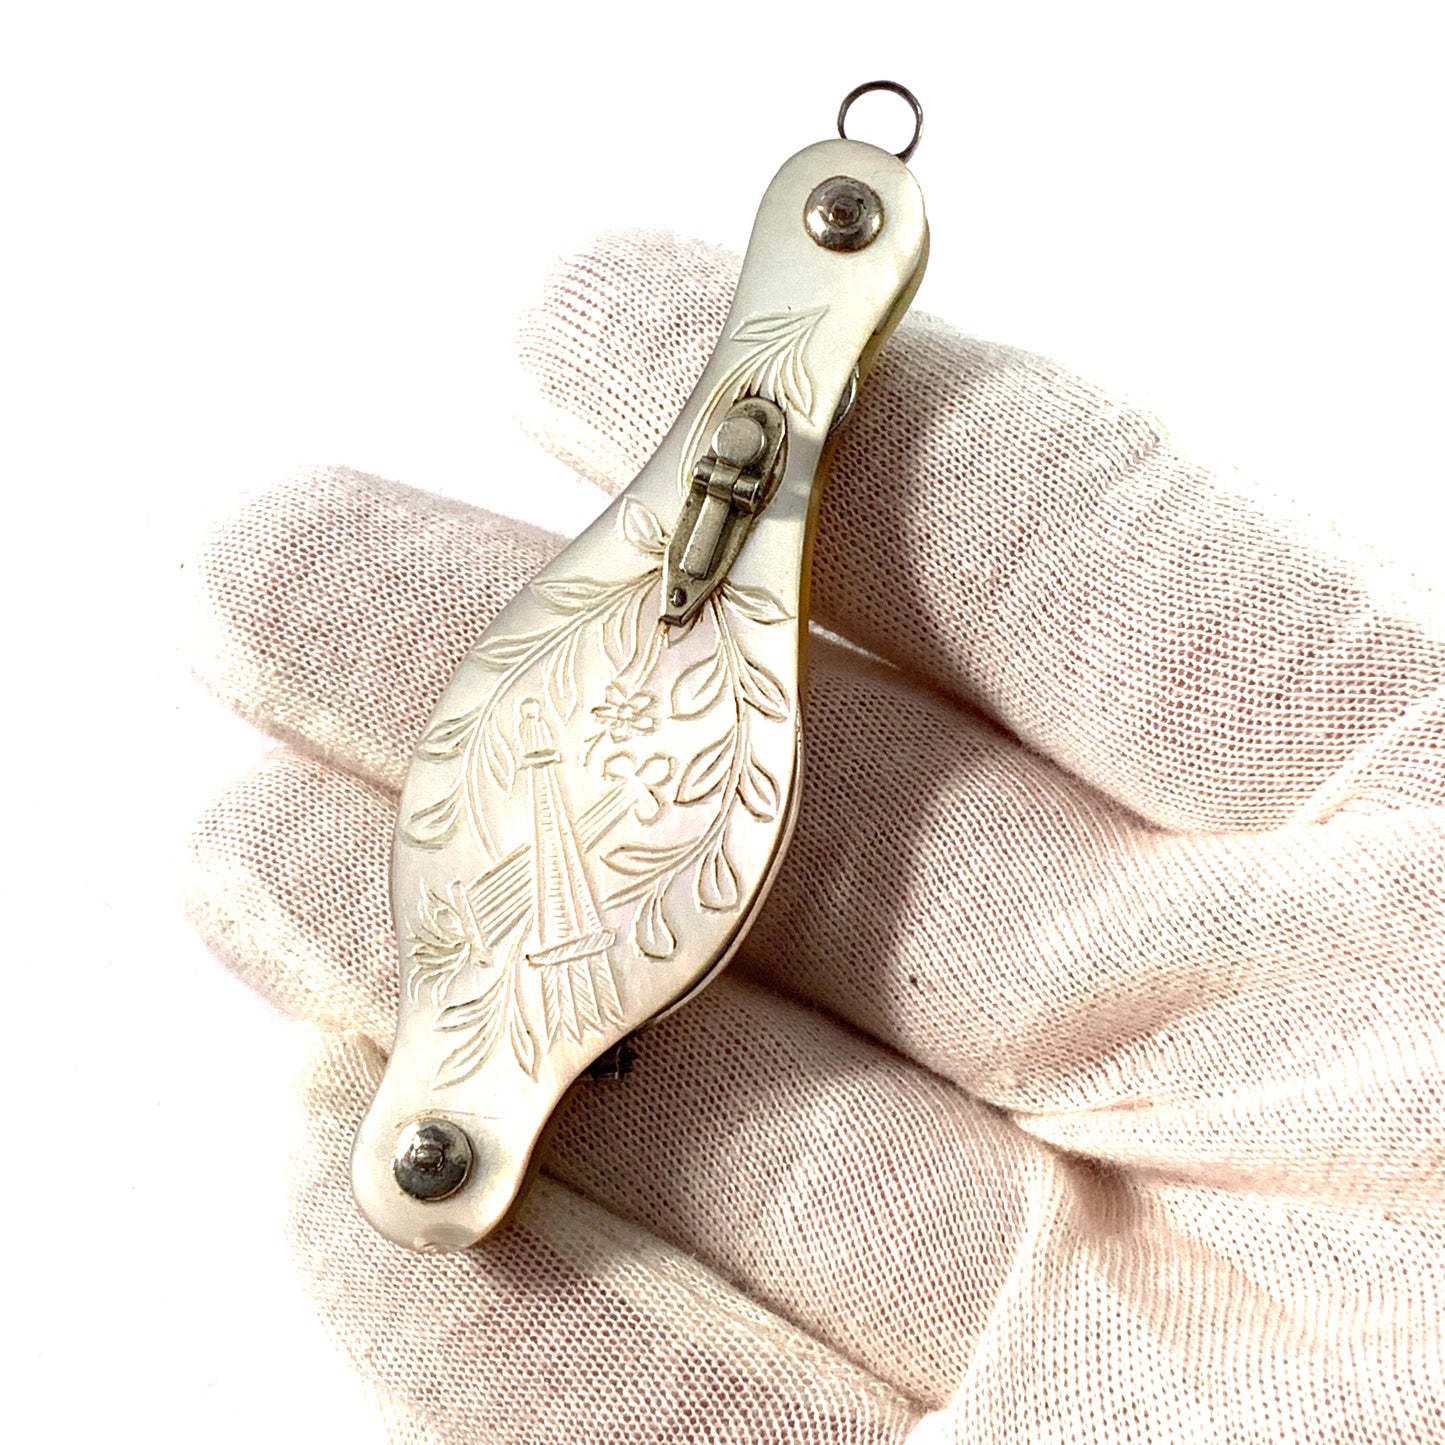 Antique c year 1900. Mother of Pearl Metal Lorgnette Glasses Pendant.